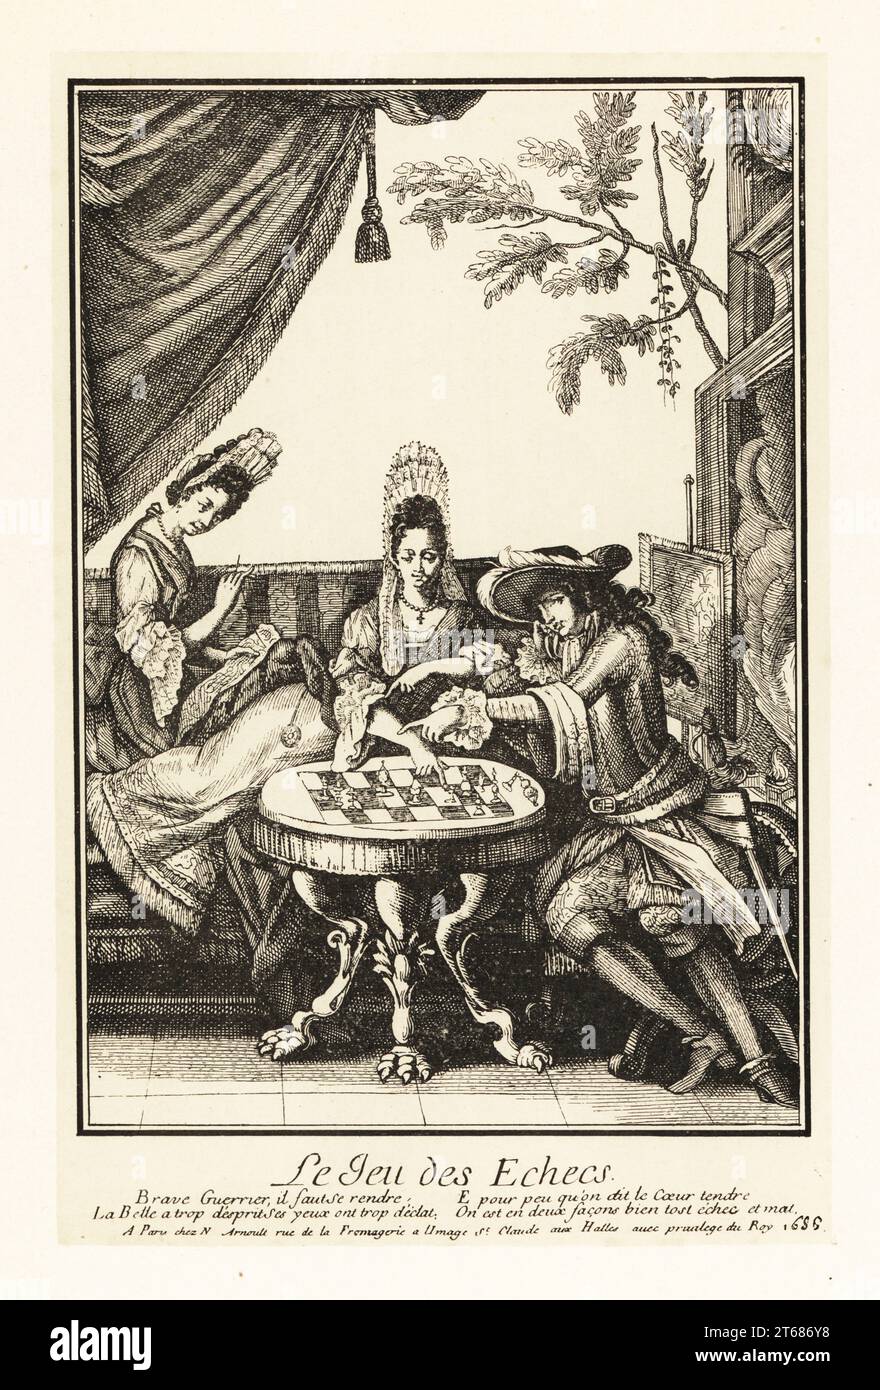 A French noble woman and fop playing a game of chess, 1686. Another lady works on a piece of embroidery on the sofa. Le Jeu des Echecs. Lithograph after Nicolas Arnoult from Henry Rene dAllemagnes Recreations et Passe-Temps, Games and Pastimes, Hachette, Paris, 1906. Stock Photo